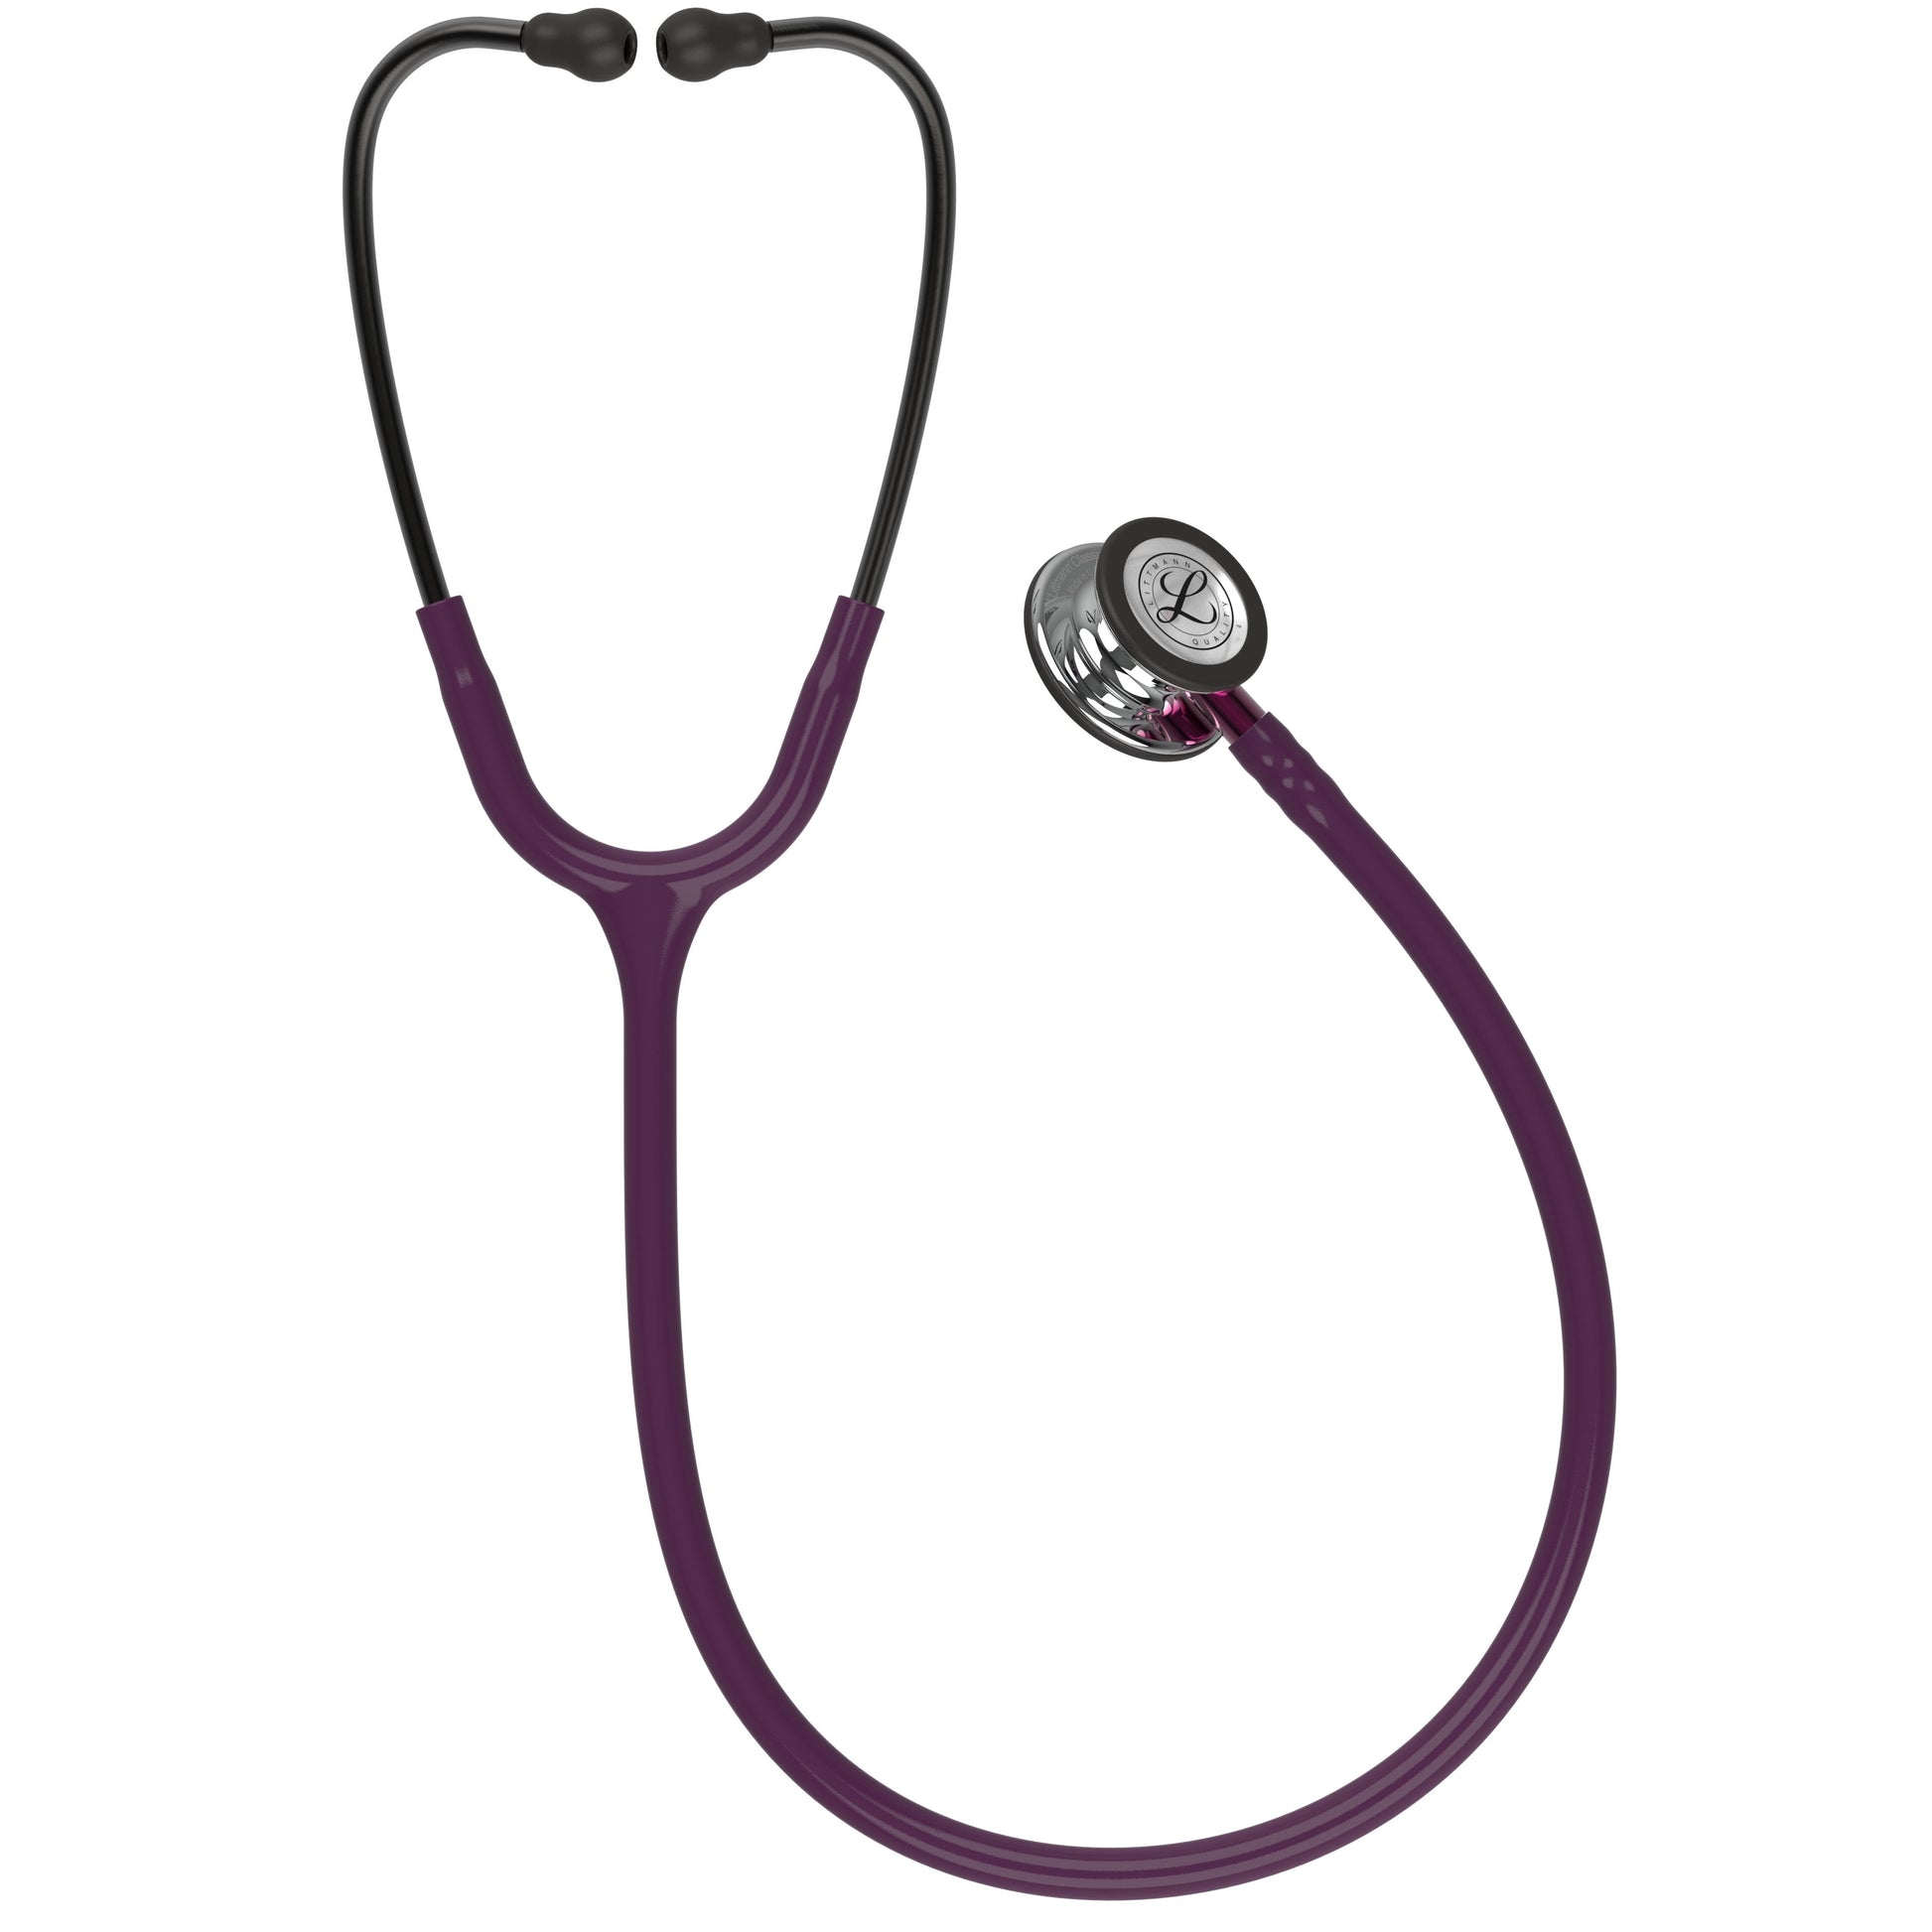 Stethoscope Cleaning 101 - Transforming Outcomes